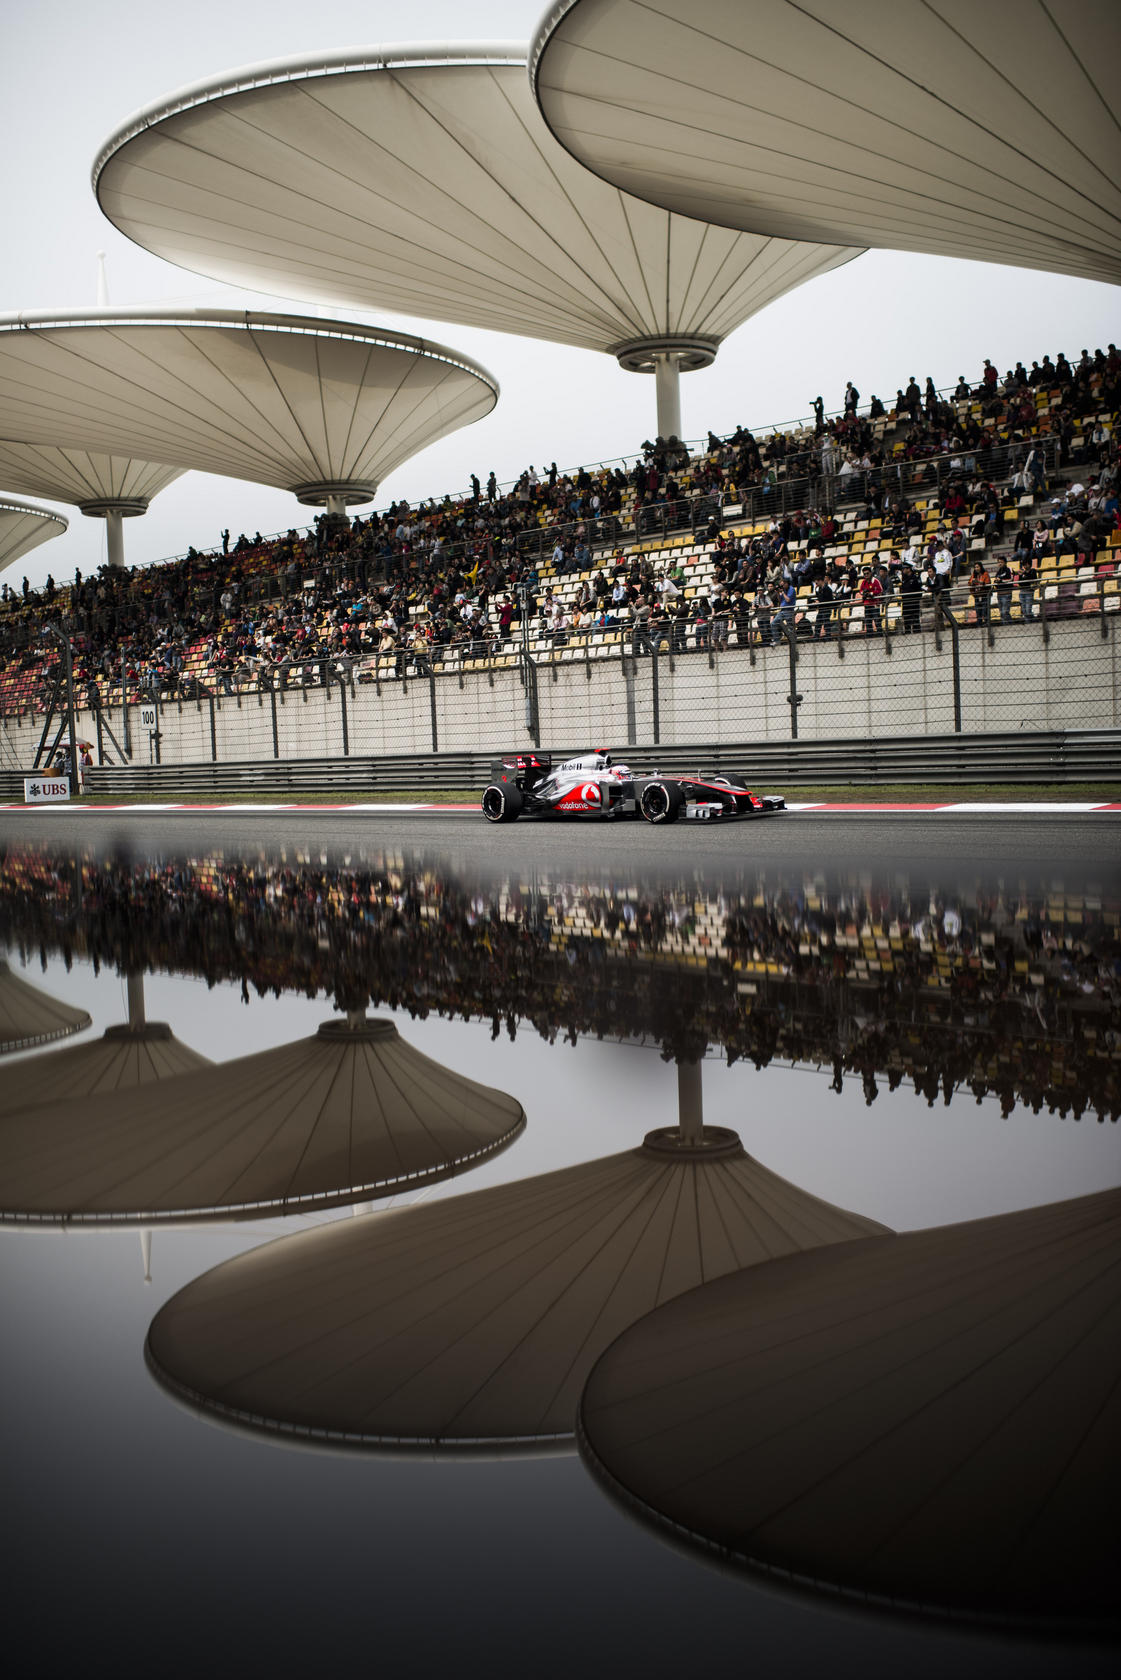 Britain's Jenson Button racing in his MP-27 car during the UBS Chinese F1 Grand Prix at Shanghai, 2012. Photo: Victor Fraile/Corbis